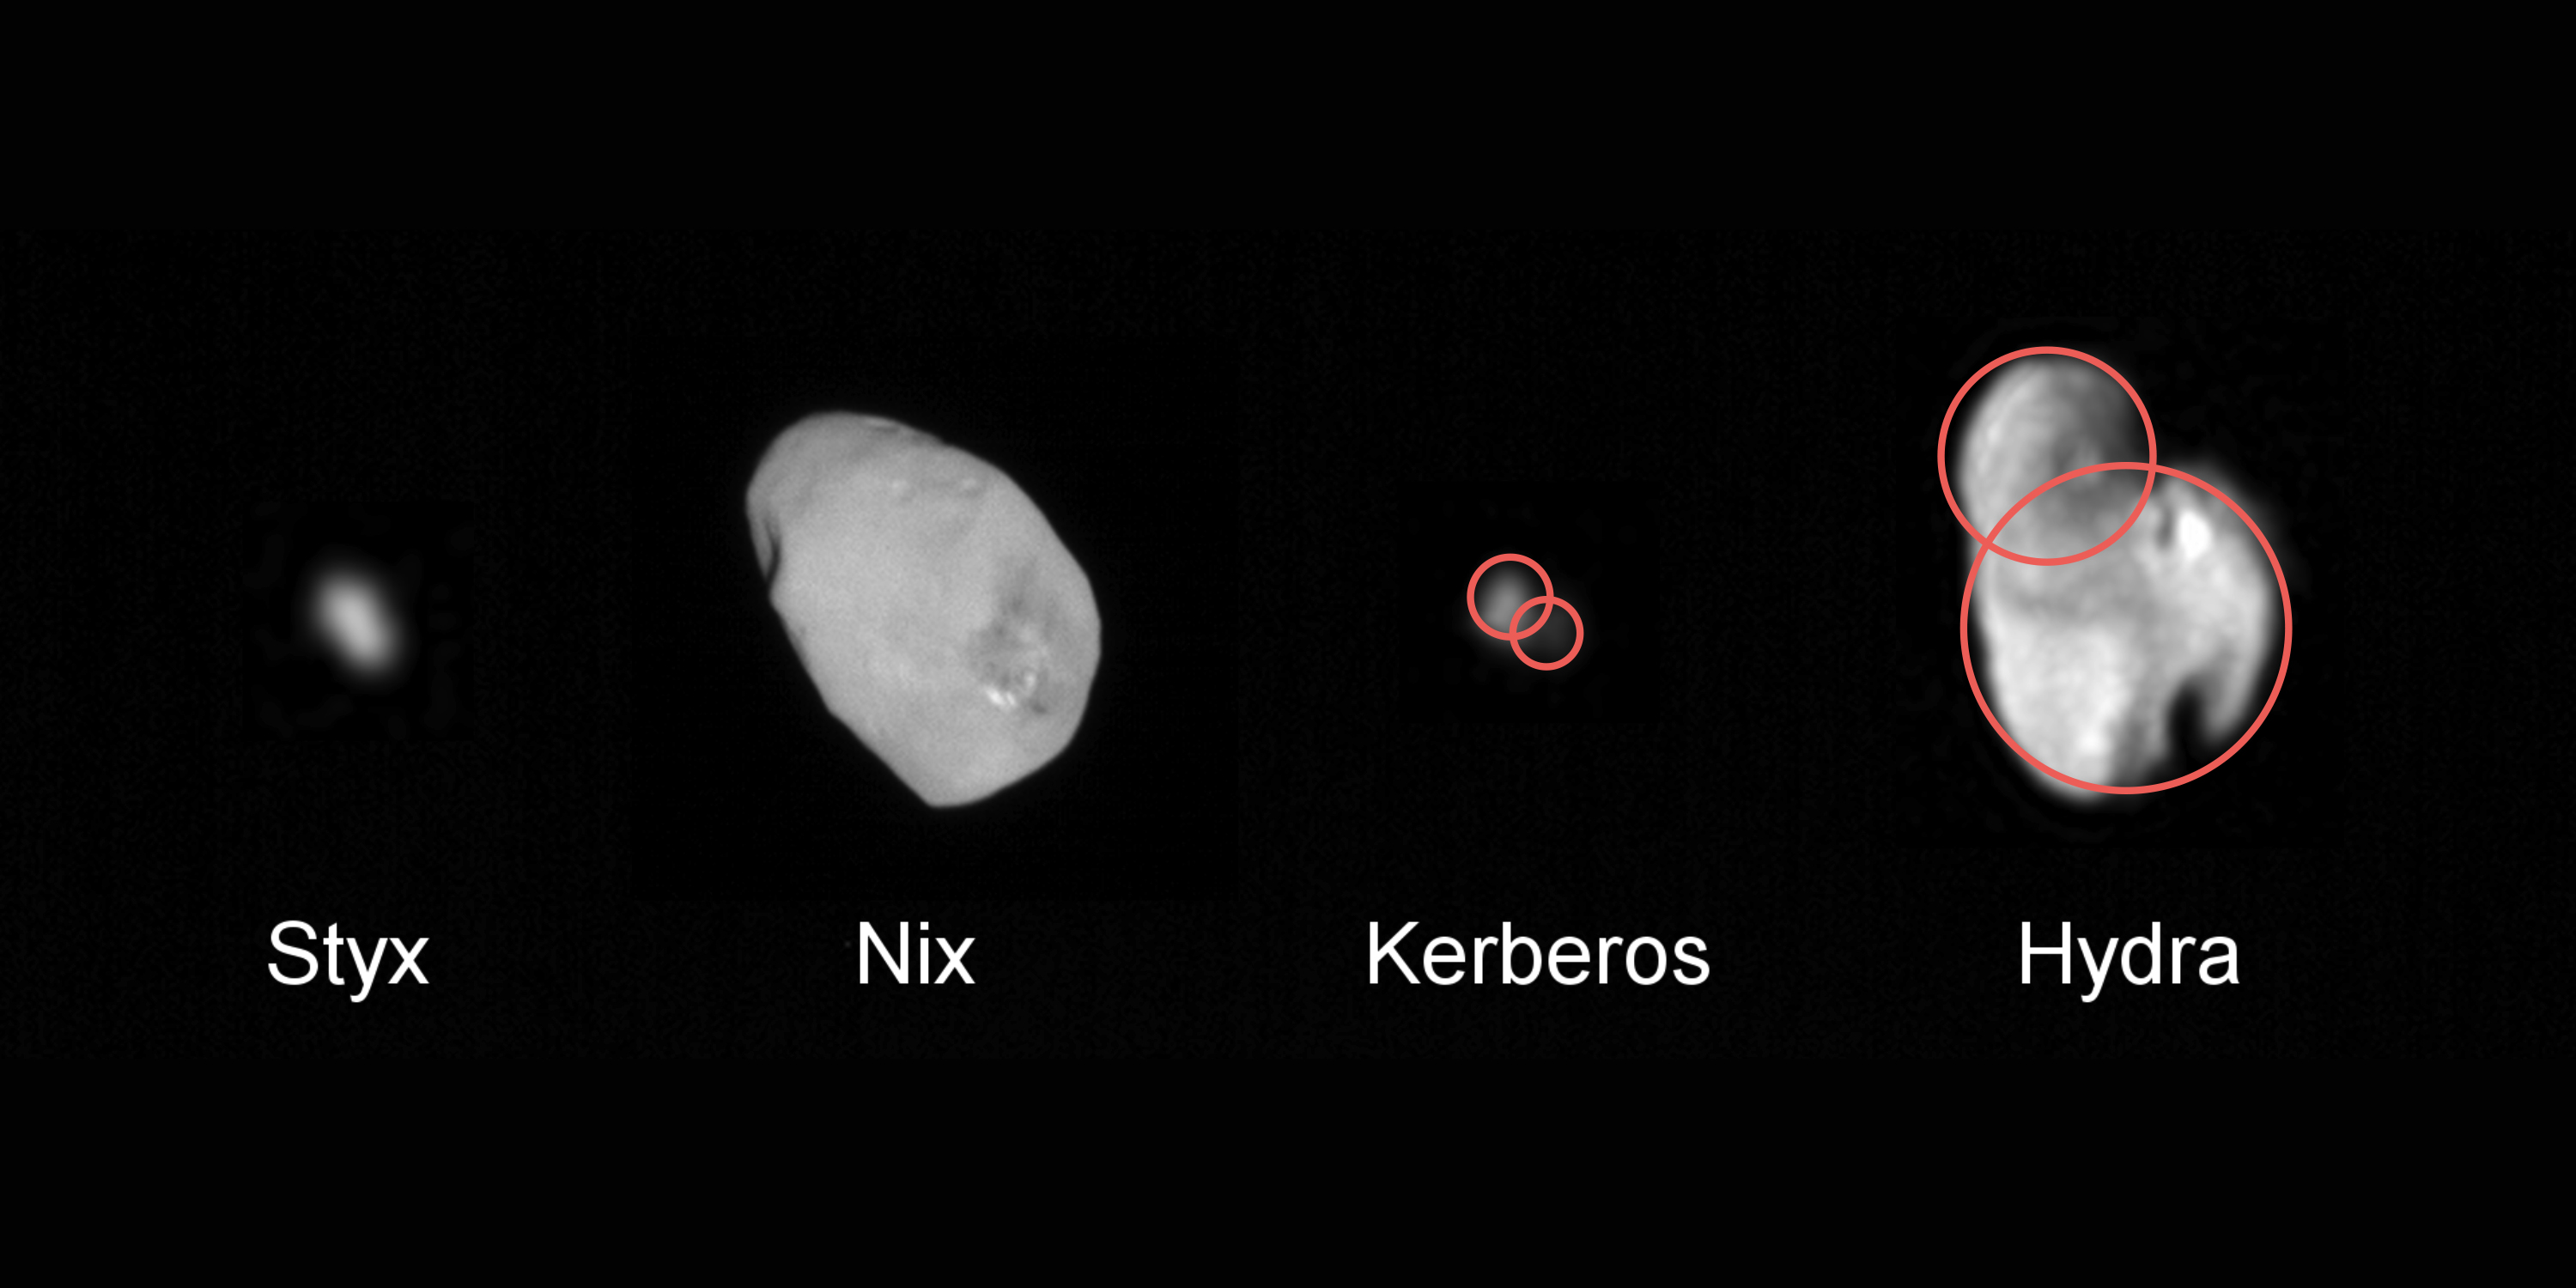 Some of Pluto's smaller moons, such as Kerberos and Hydra, may have formed from the merger of pervious even smaller moons. Image Credit: NASA/JHUAPL/SwRI